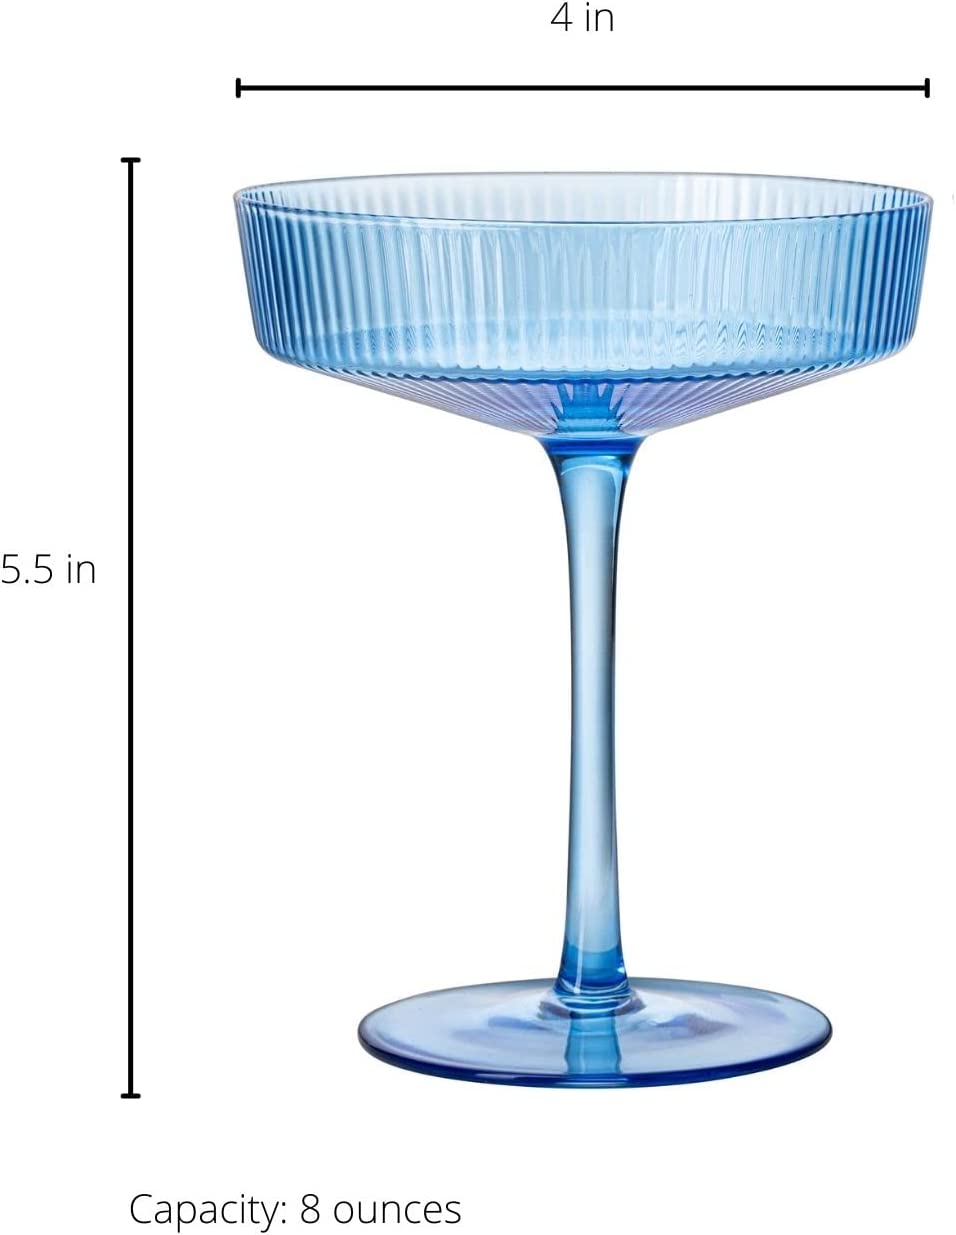 Ribbed Coupe Cocktail Glasses 8 oz | Set of 2 | Classic Manhattan Glasses For Cocktails, Champagne Coupe, Ripple Coupe Glasses, Art Deco Gatsby Vintage, Crystal with Stems (Blue, Set of 2)-5